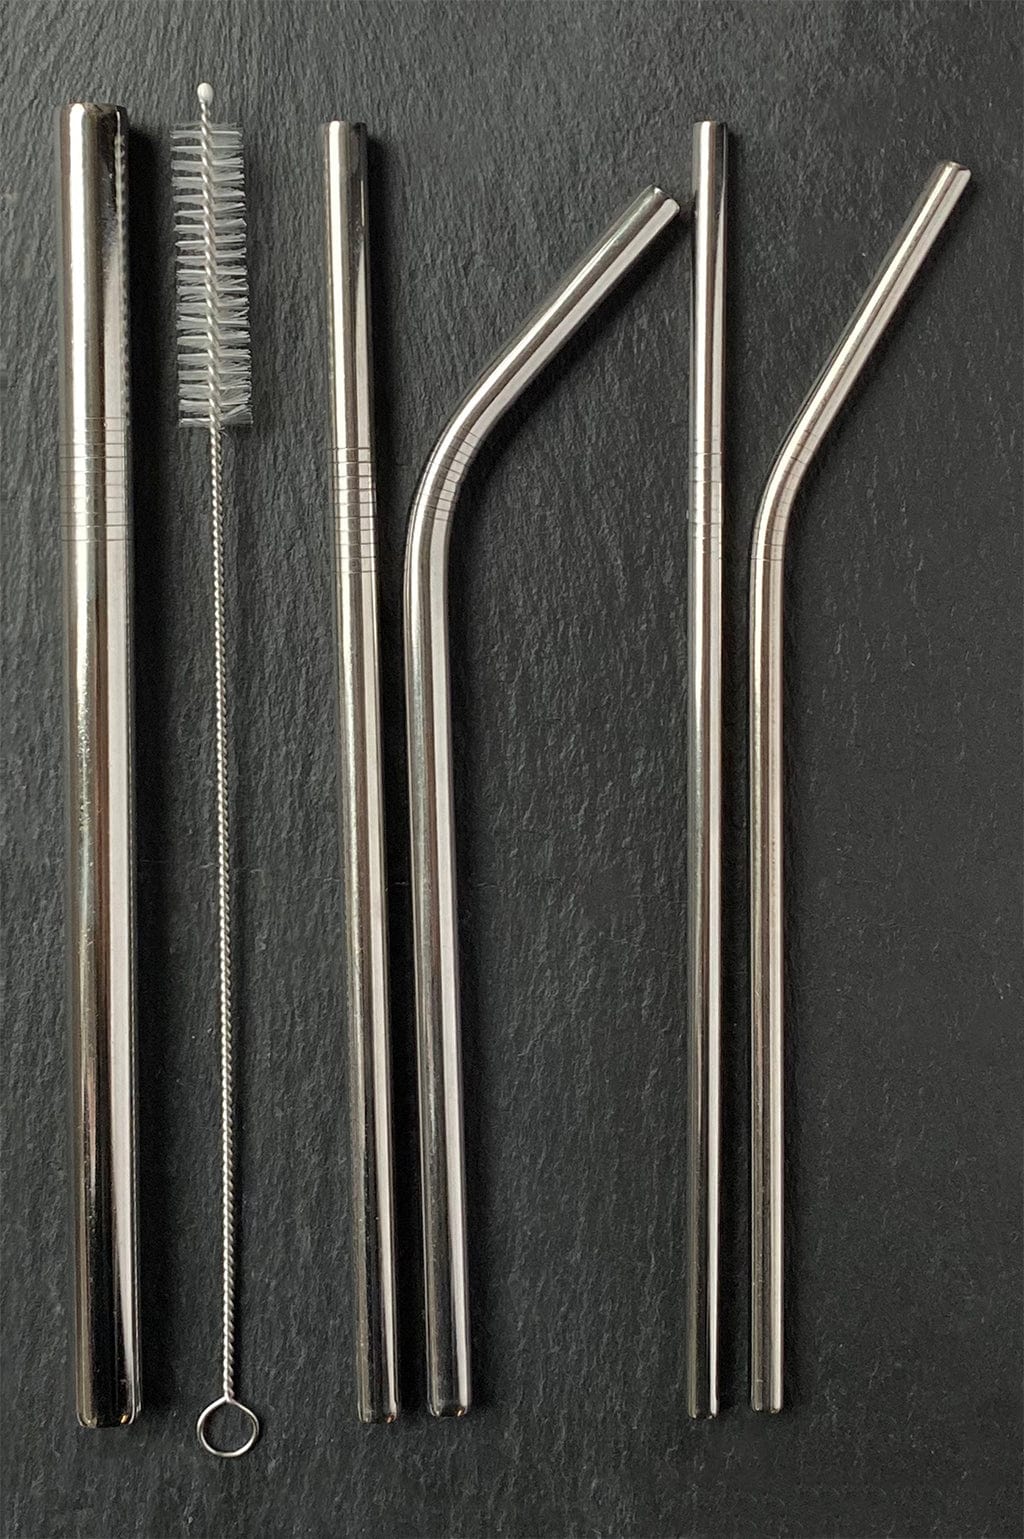 https://staiy.com/cdn/shop/products/ethika-inc-reusable-stainless-steel-straws-set-of-7-or-11-pieces-32810471358645_1fd5633e-d407-4c8b-a0b9-a50628a559b0.jpg?v=1648477530